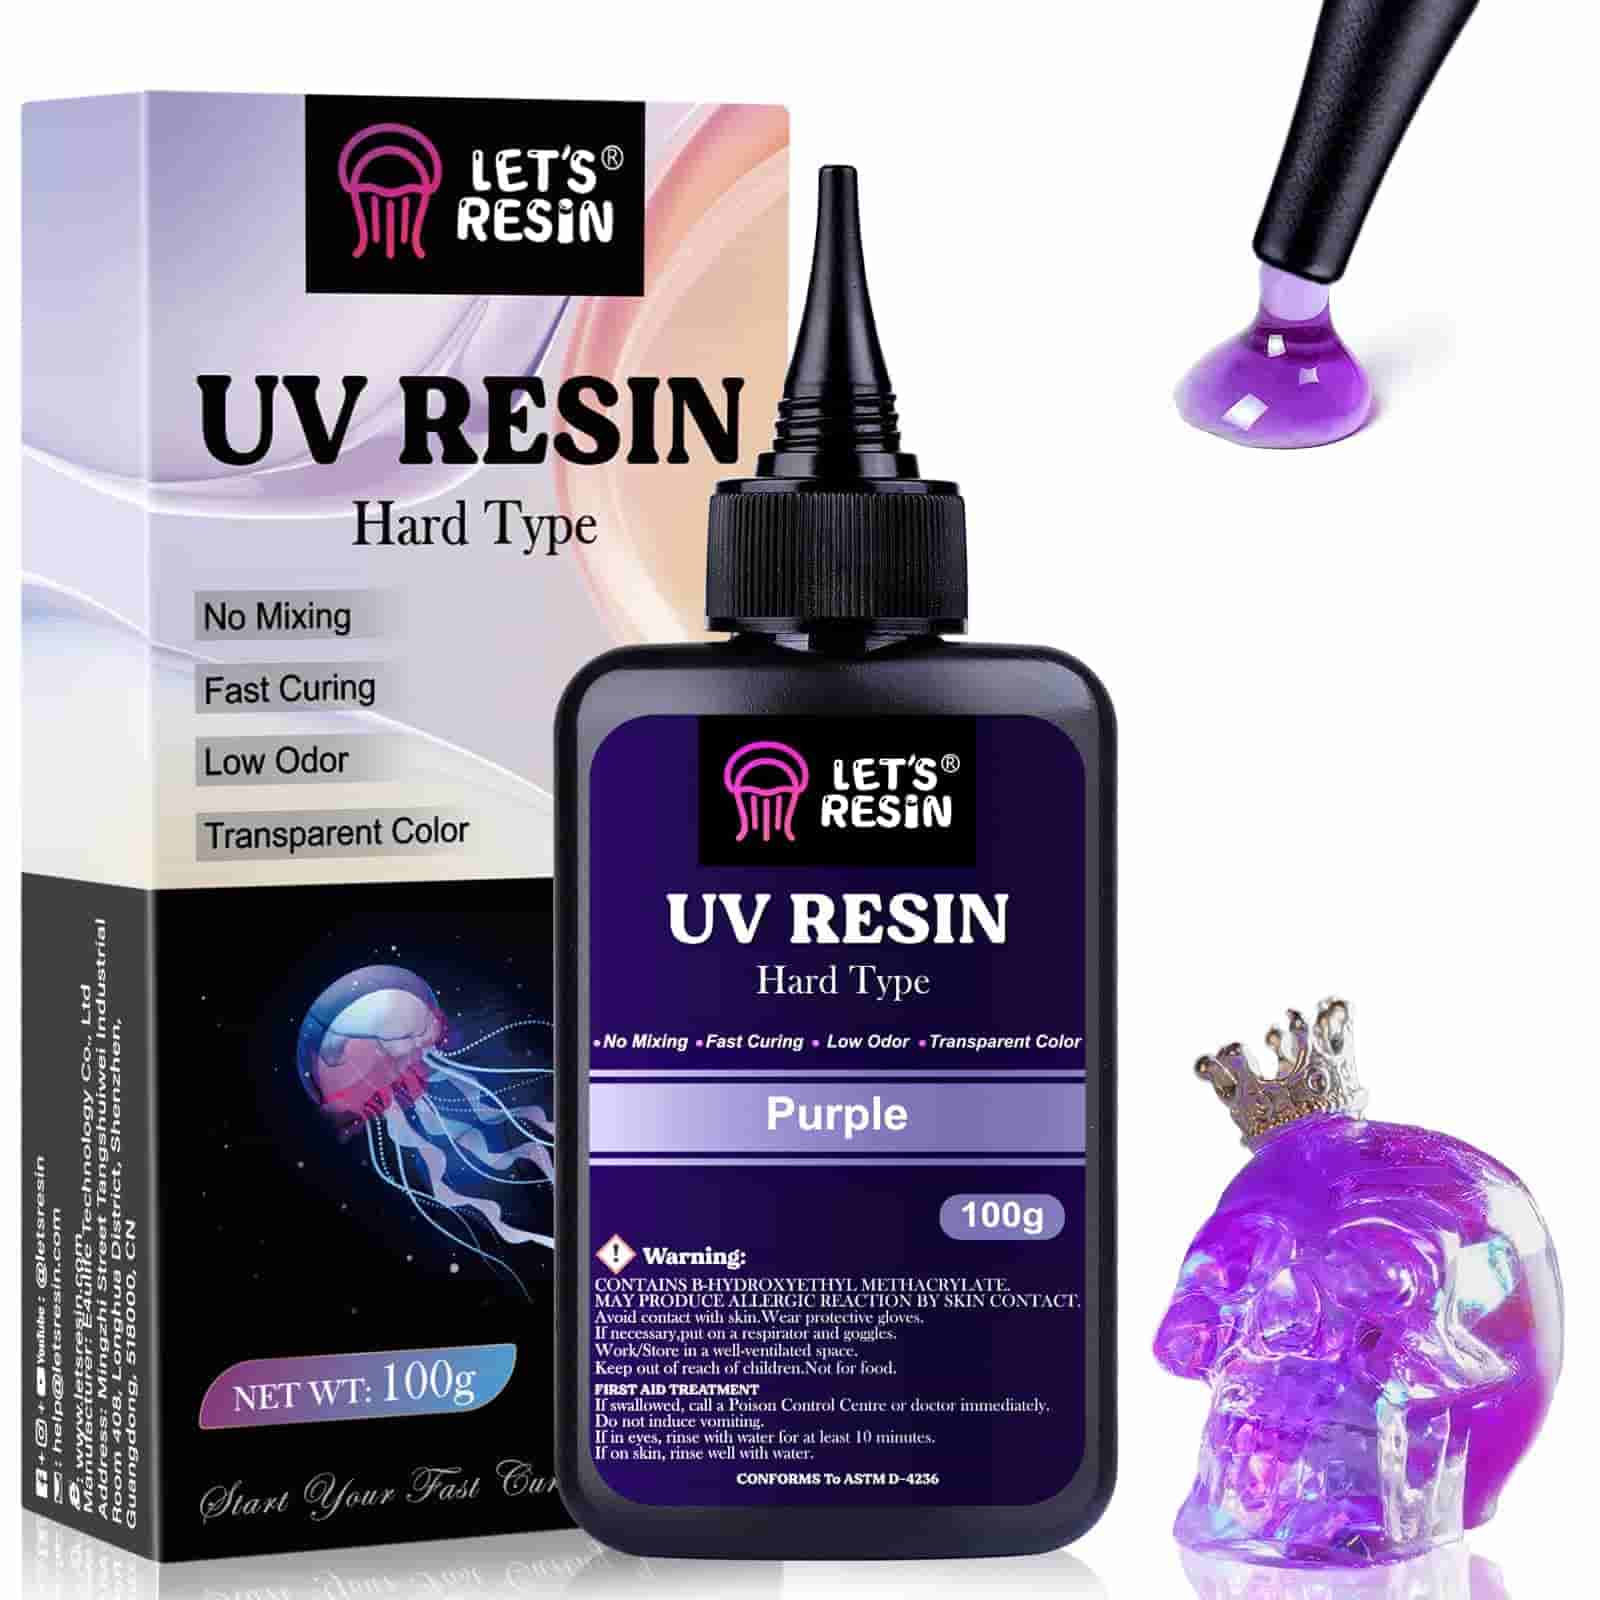 Clear UV Resin - Soft Type (100g)